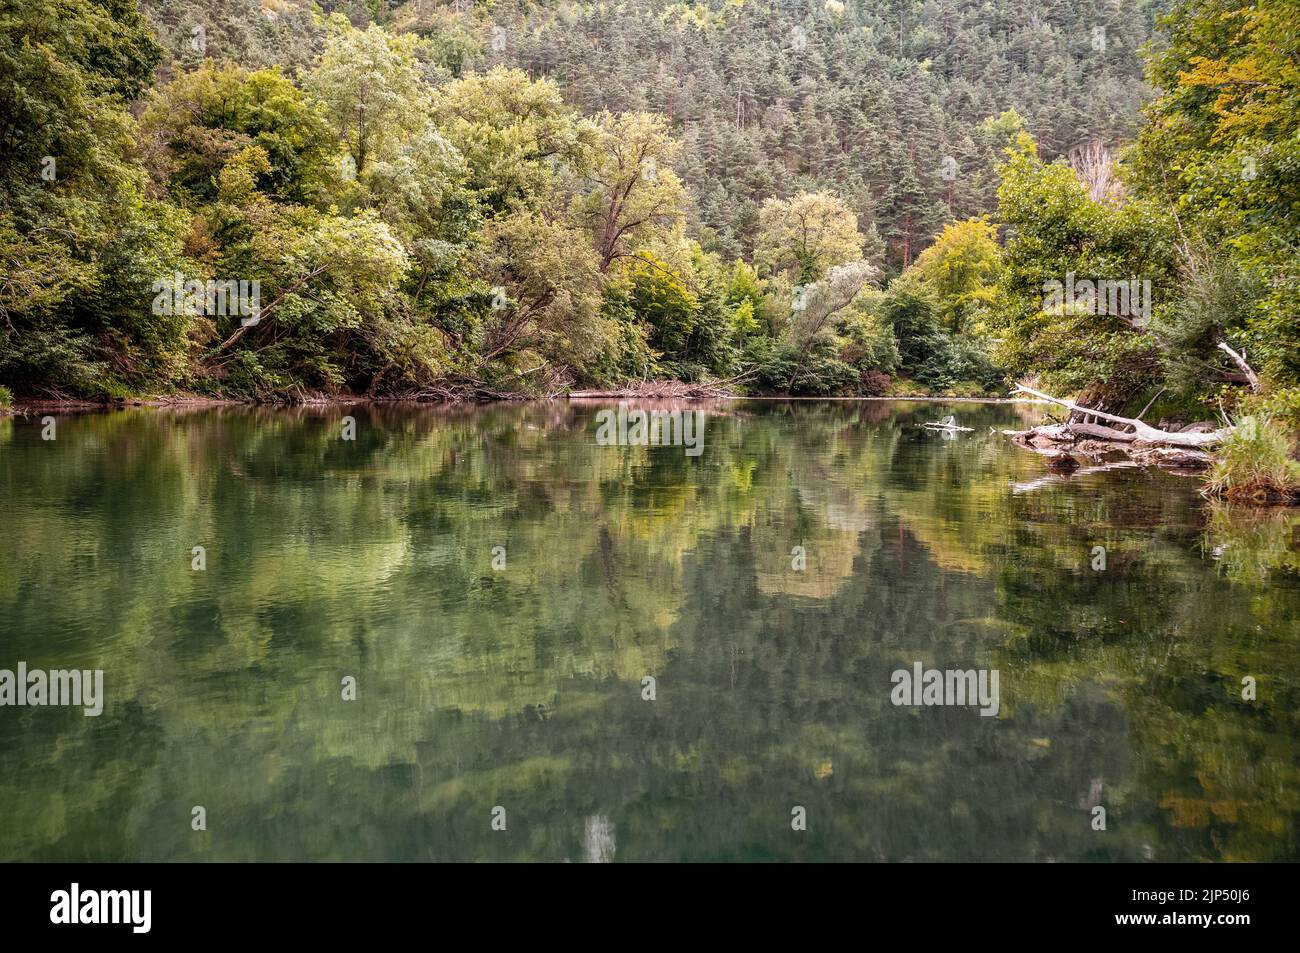 Tranquility in the Gorges du Tarn, Lozere, France Stock Photo